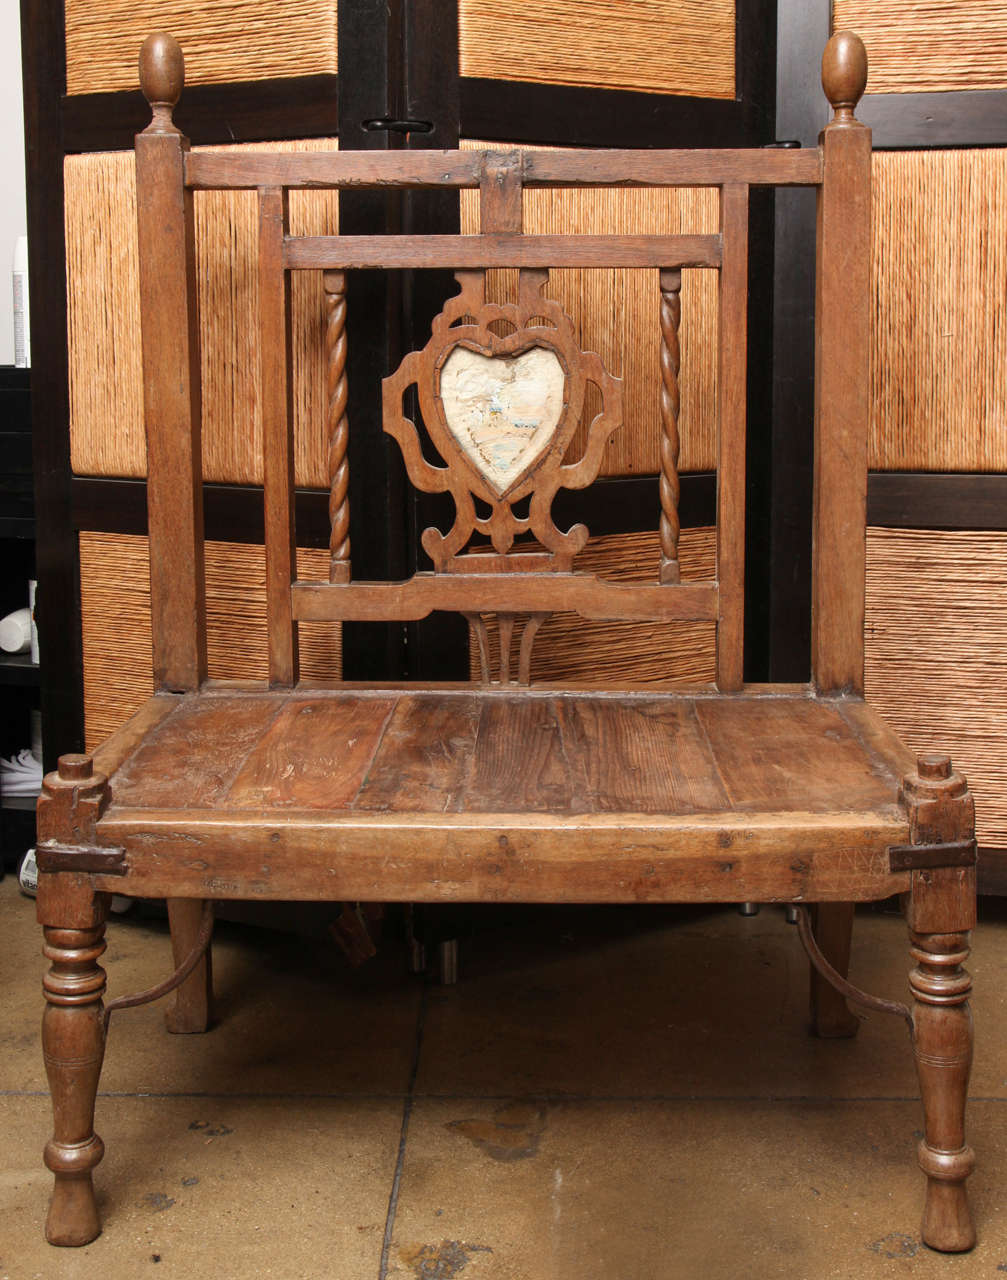 A wood bench from India with a glass heart medallion and finials.